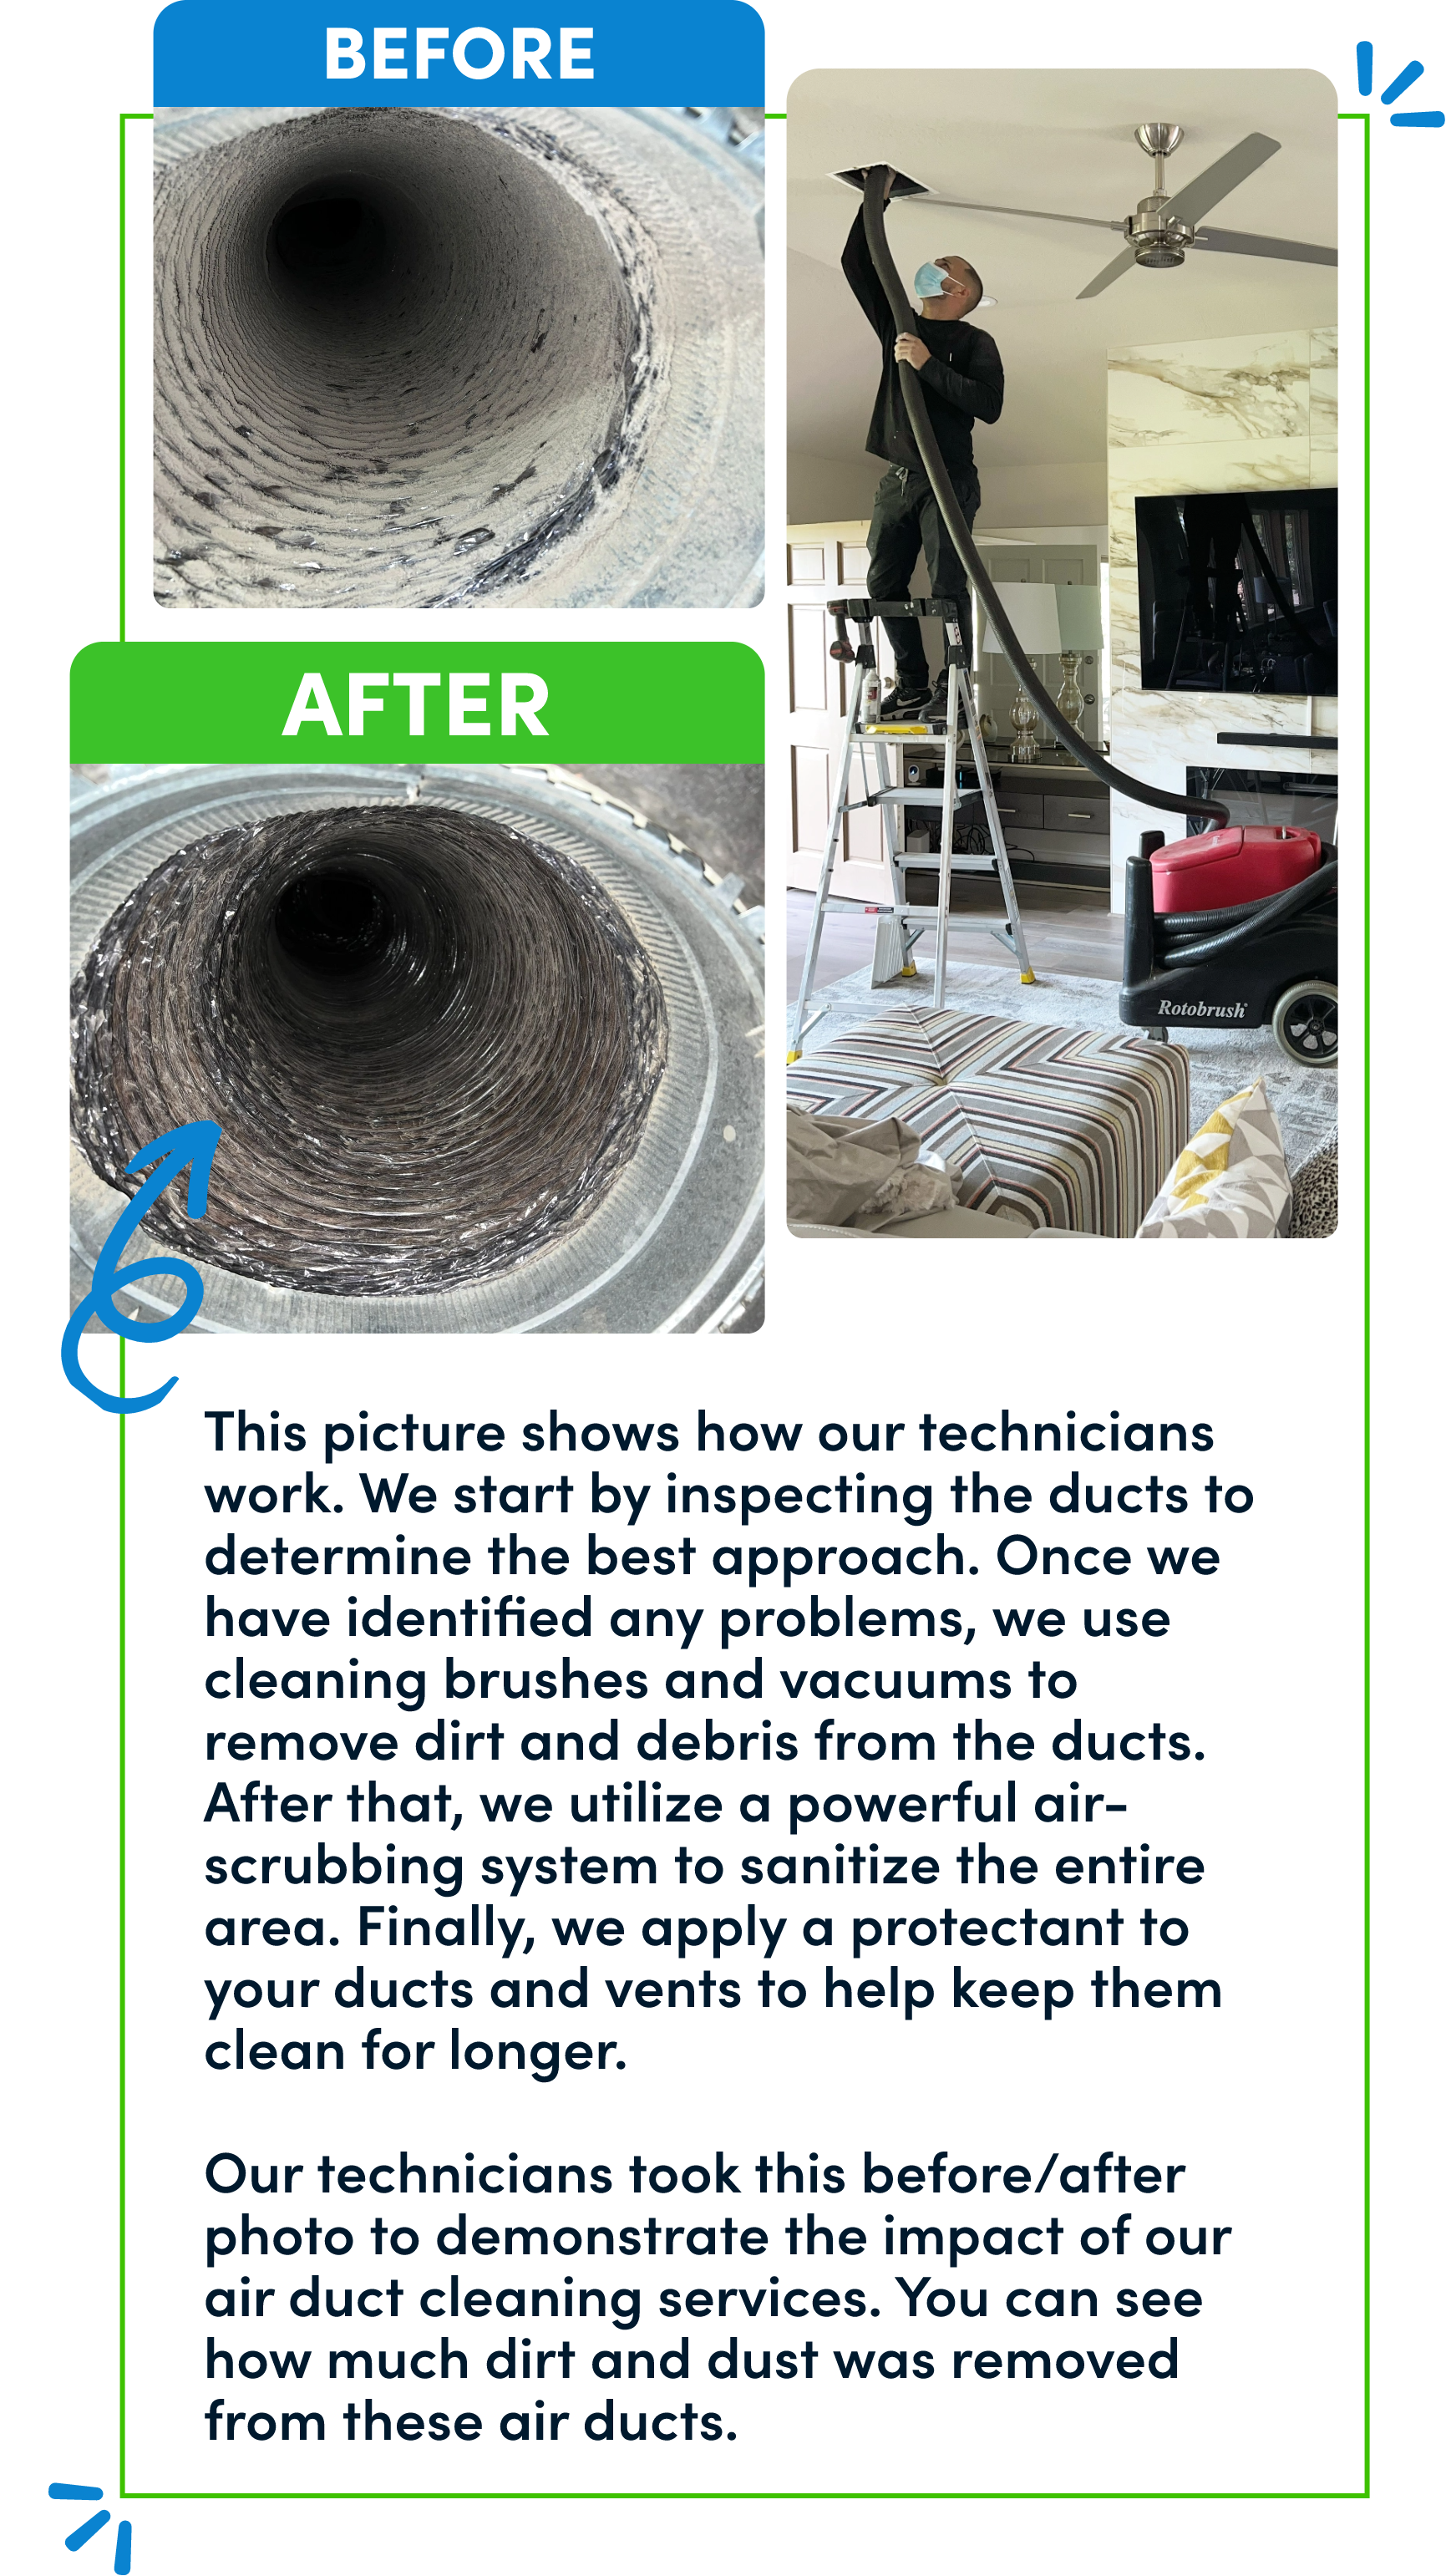 Certified Professional Air Duct Cleaning Services in Dallas-Fort Worth, Houston, and Austin, TX to Improve your Indoor Air Quality